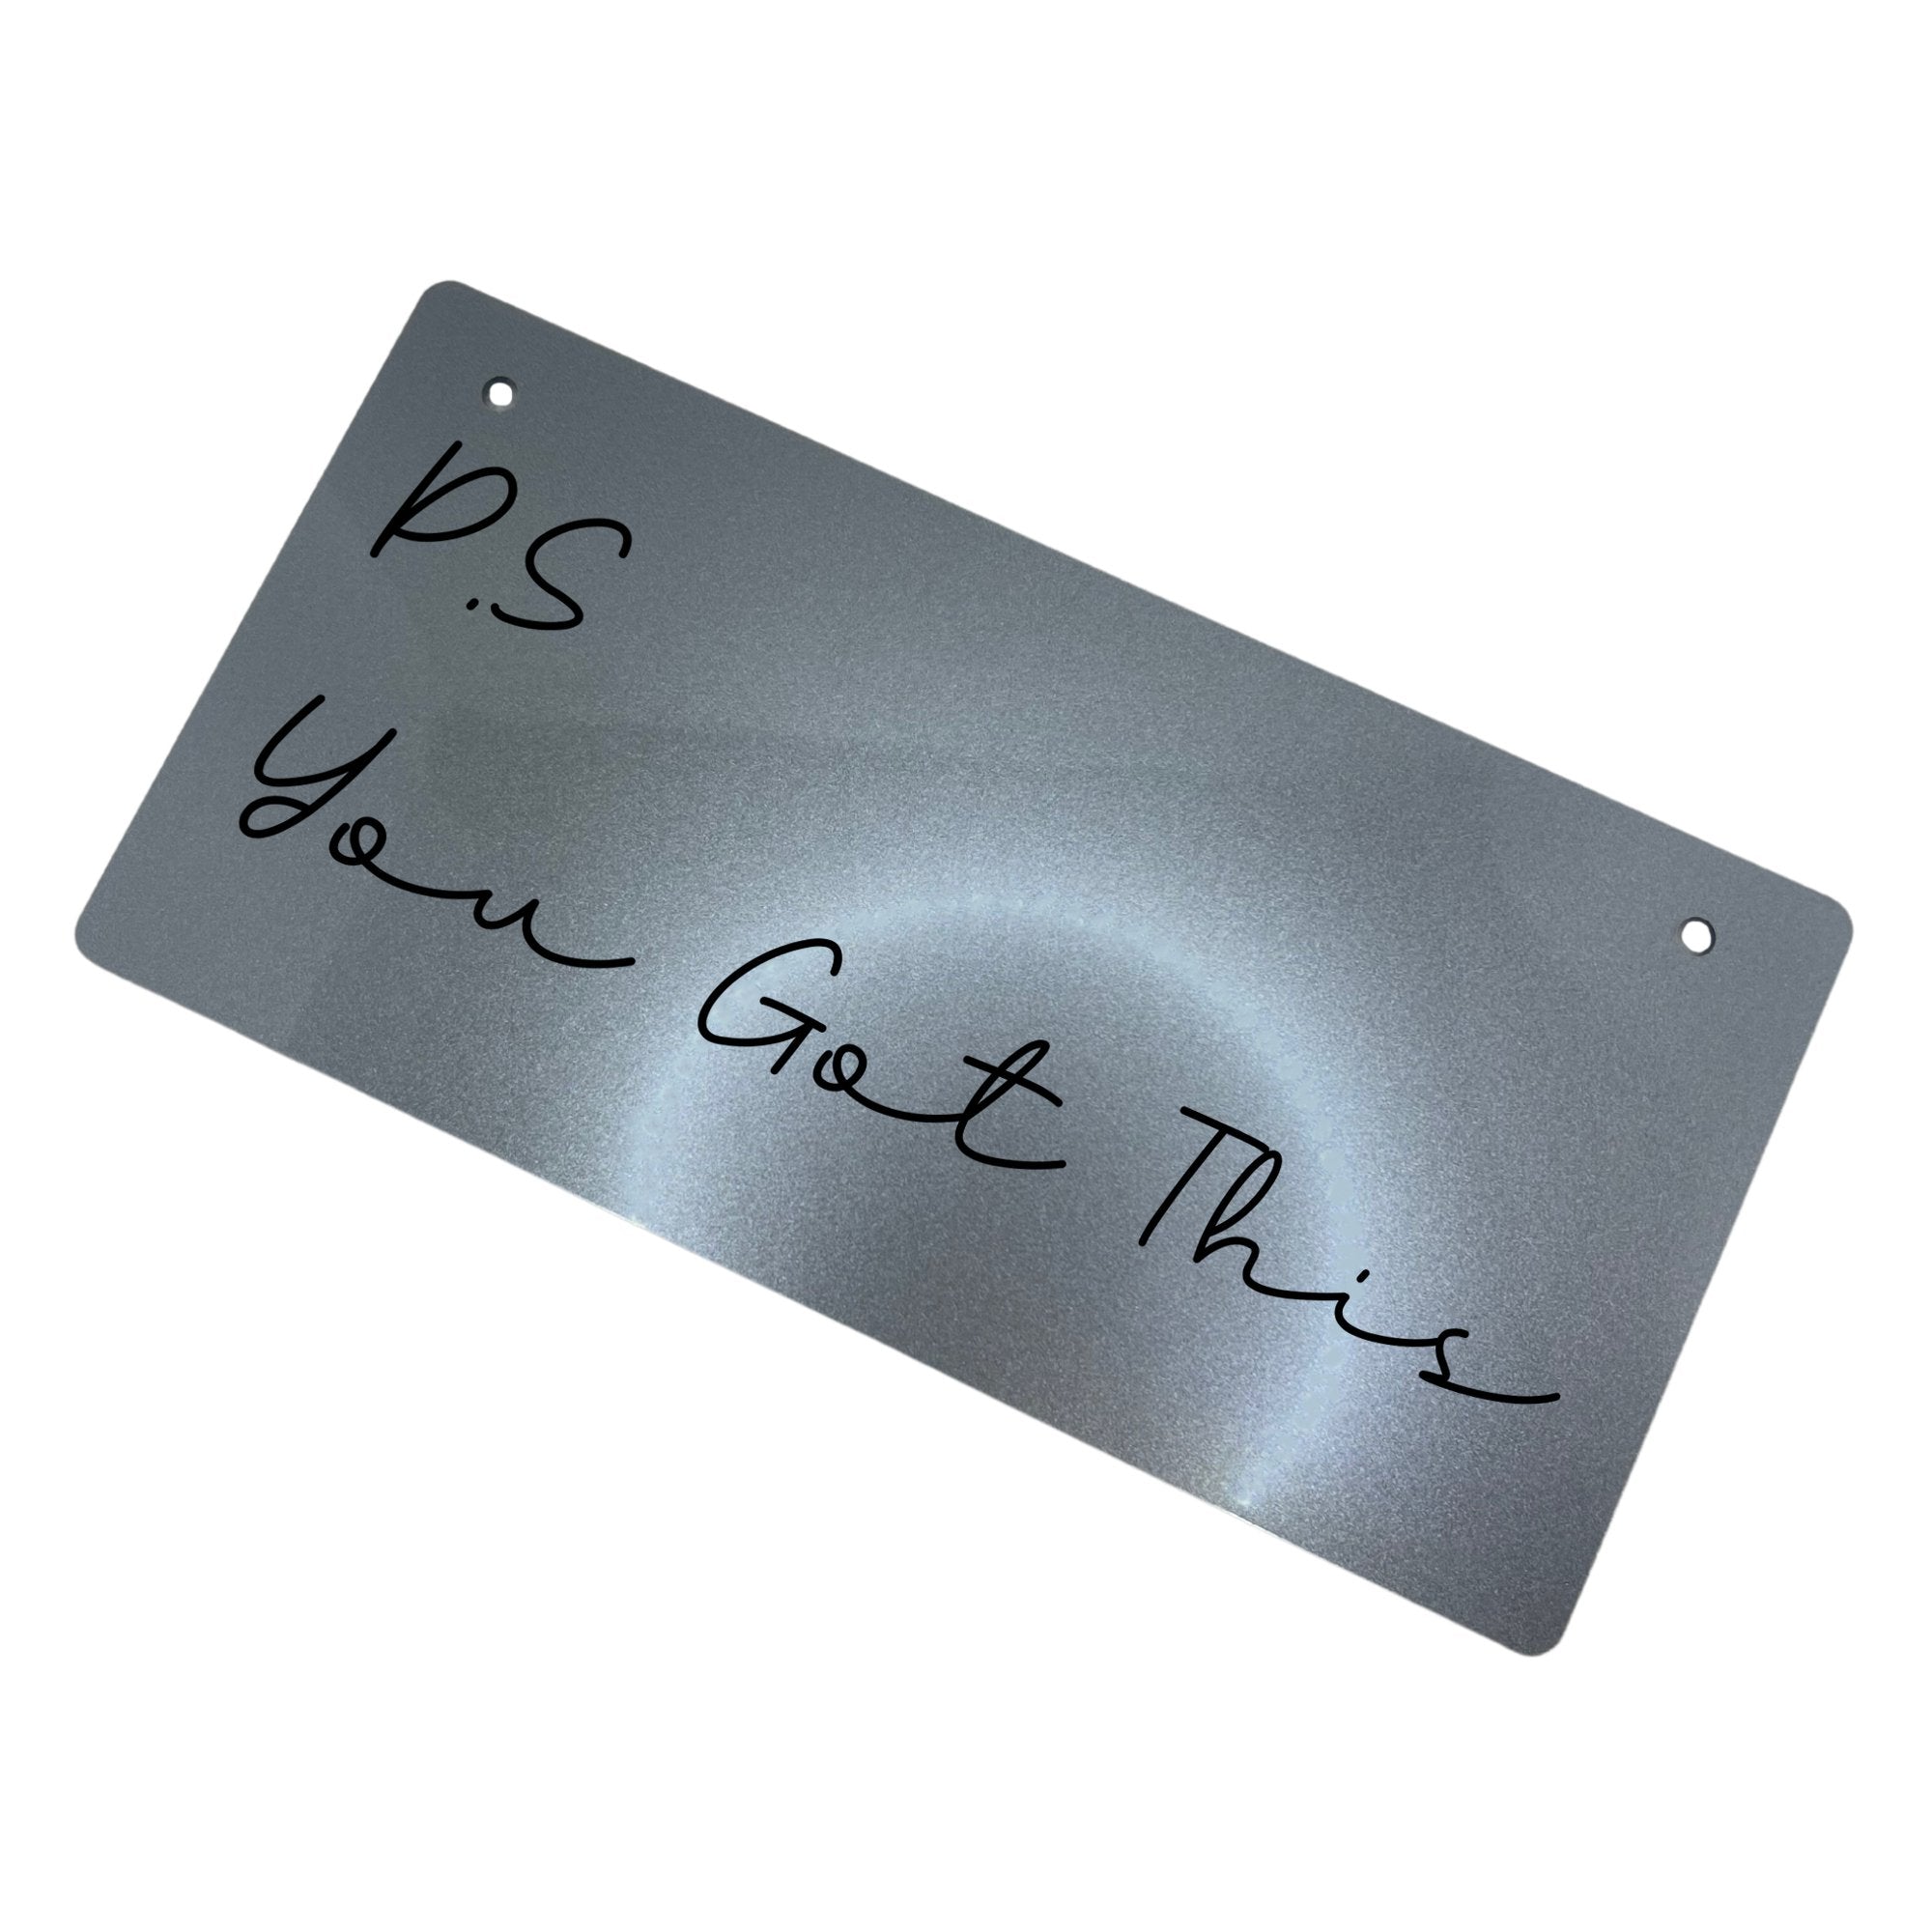 Clear and fade-resistant laser-engraved inscription of the empowering message on the sign.